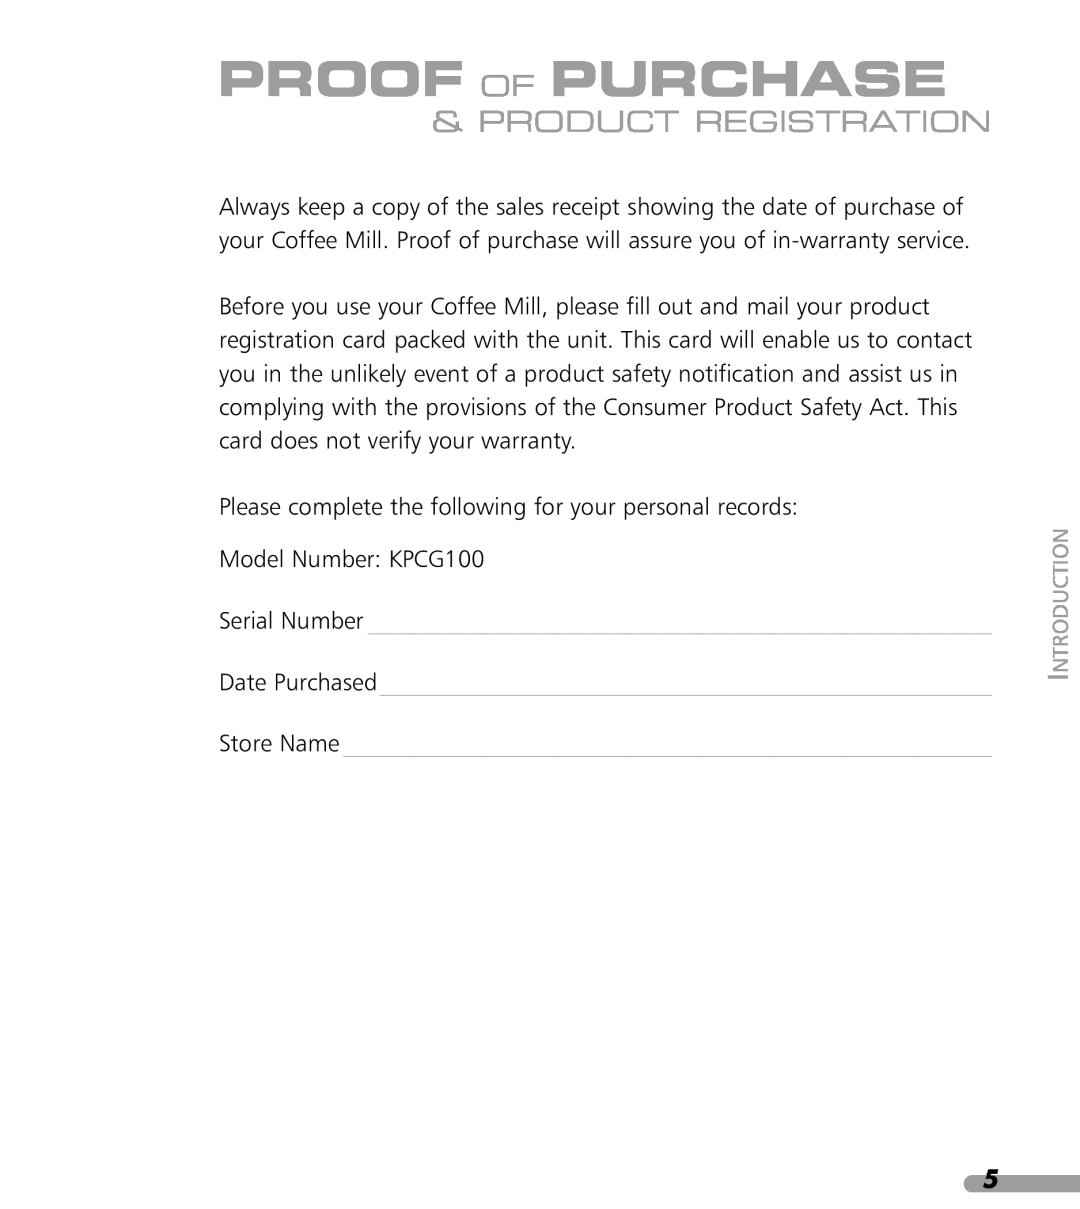 KitchenAid KPCG100 manual Proof Of Purchase, Product Registration, Serial Number Date Purchased Store Name 